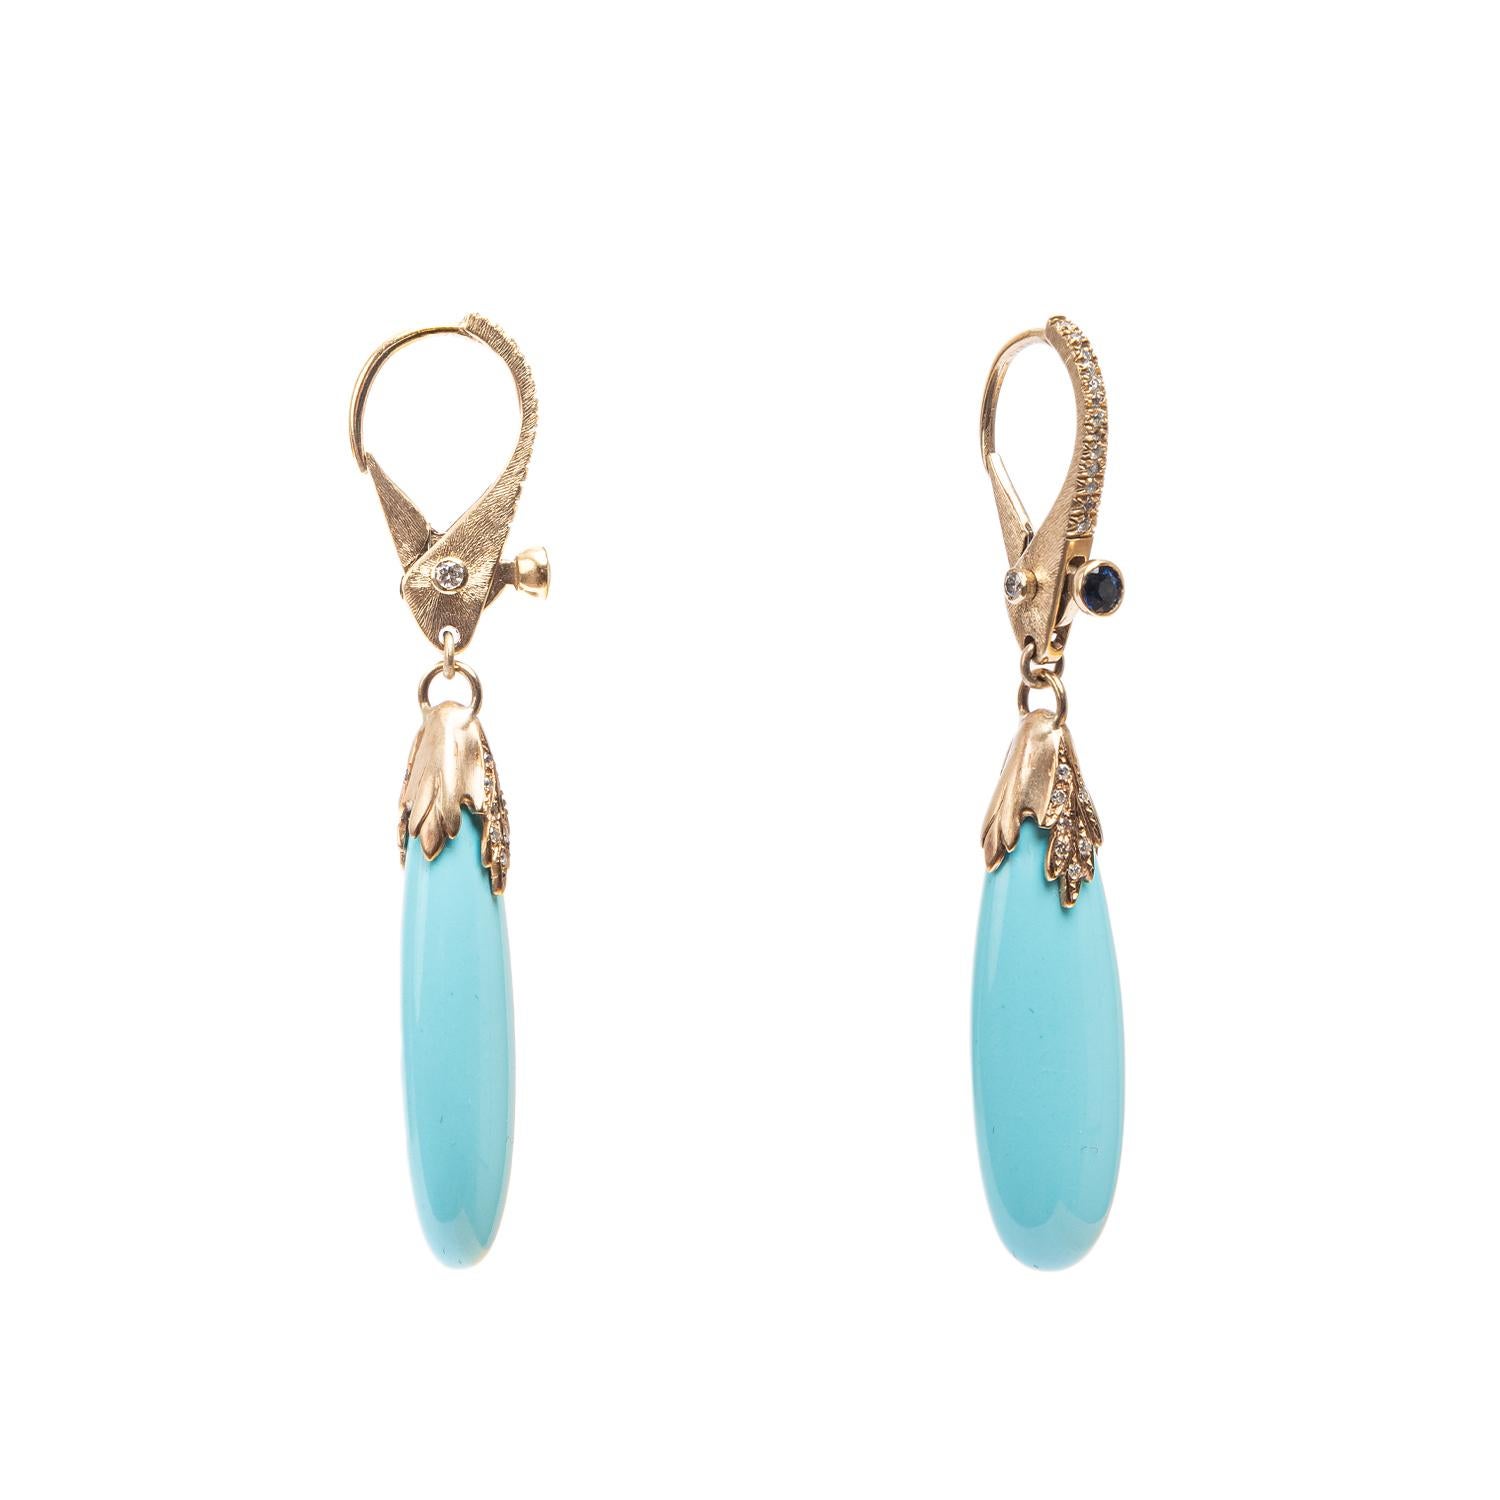 Snap Hook Earrings by Regina Gambatesa at Second Petale Gallery

About the Gemstones :

Gold 18kt, grey gold
Diamonds ct 0,36

ABOUT the CREATOR
REGINA GAMBATESA: AN ARTIST OF SPIRIT AND FORM
Regina Gambatesa is a jewelry artist who strives to